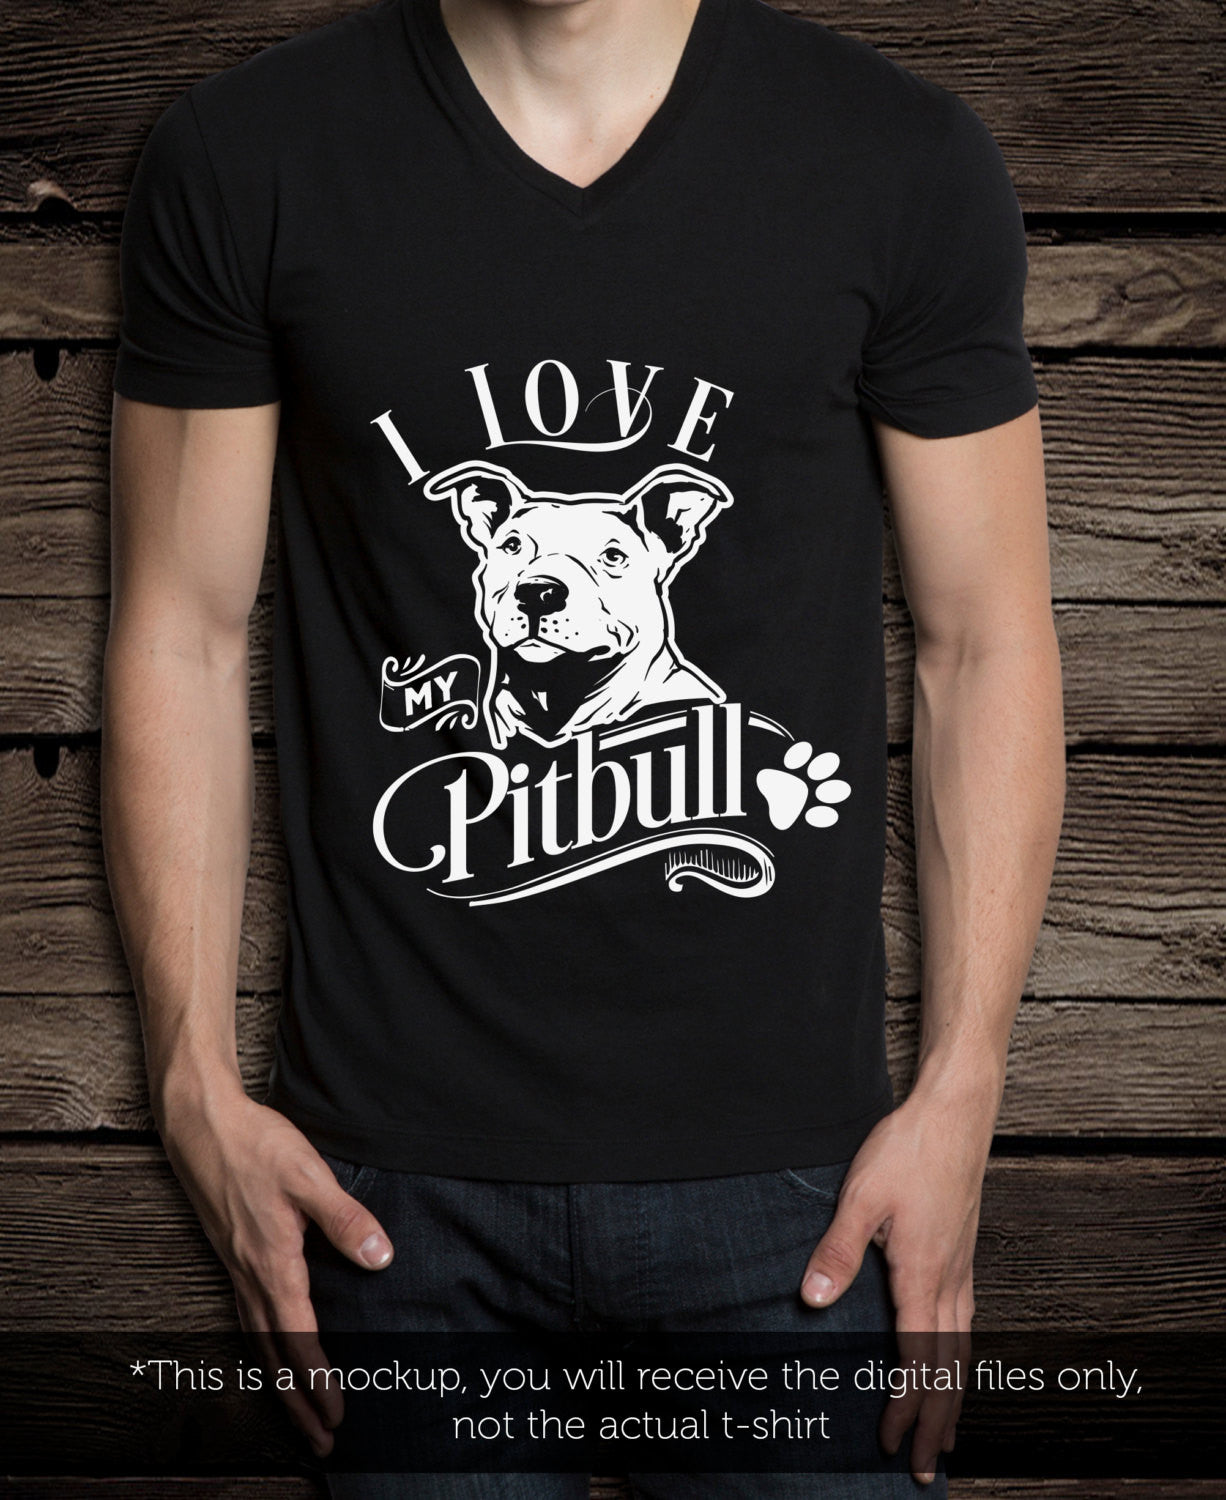 I love my Pitbull - SVG file Cutting File Clipart in Svg, Eps, Dxf, Pn